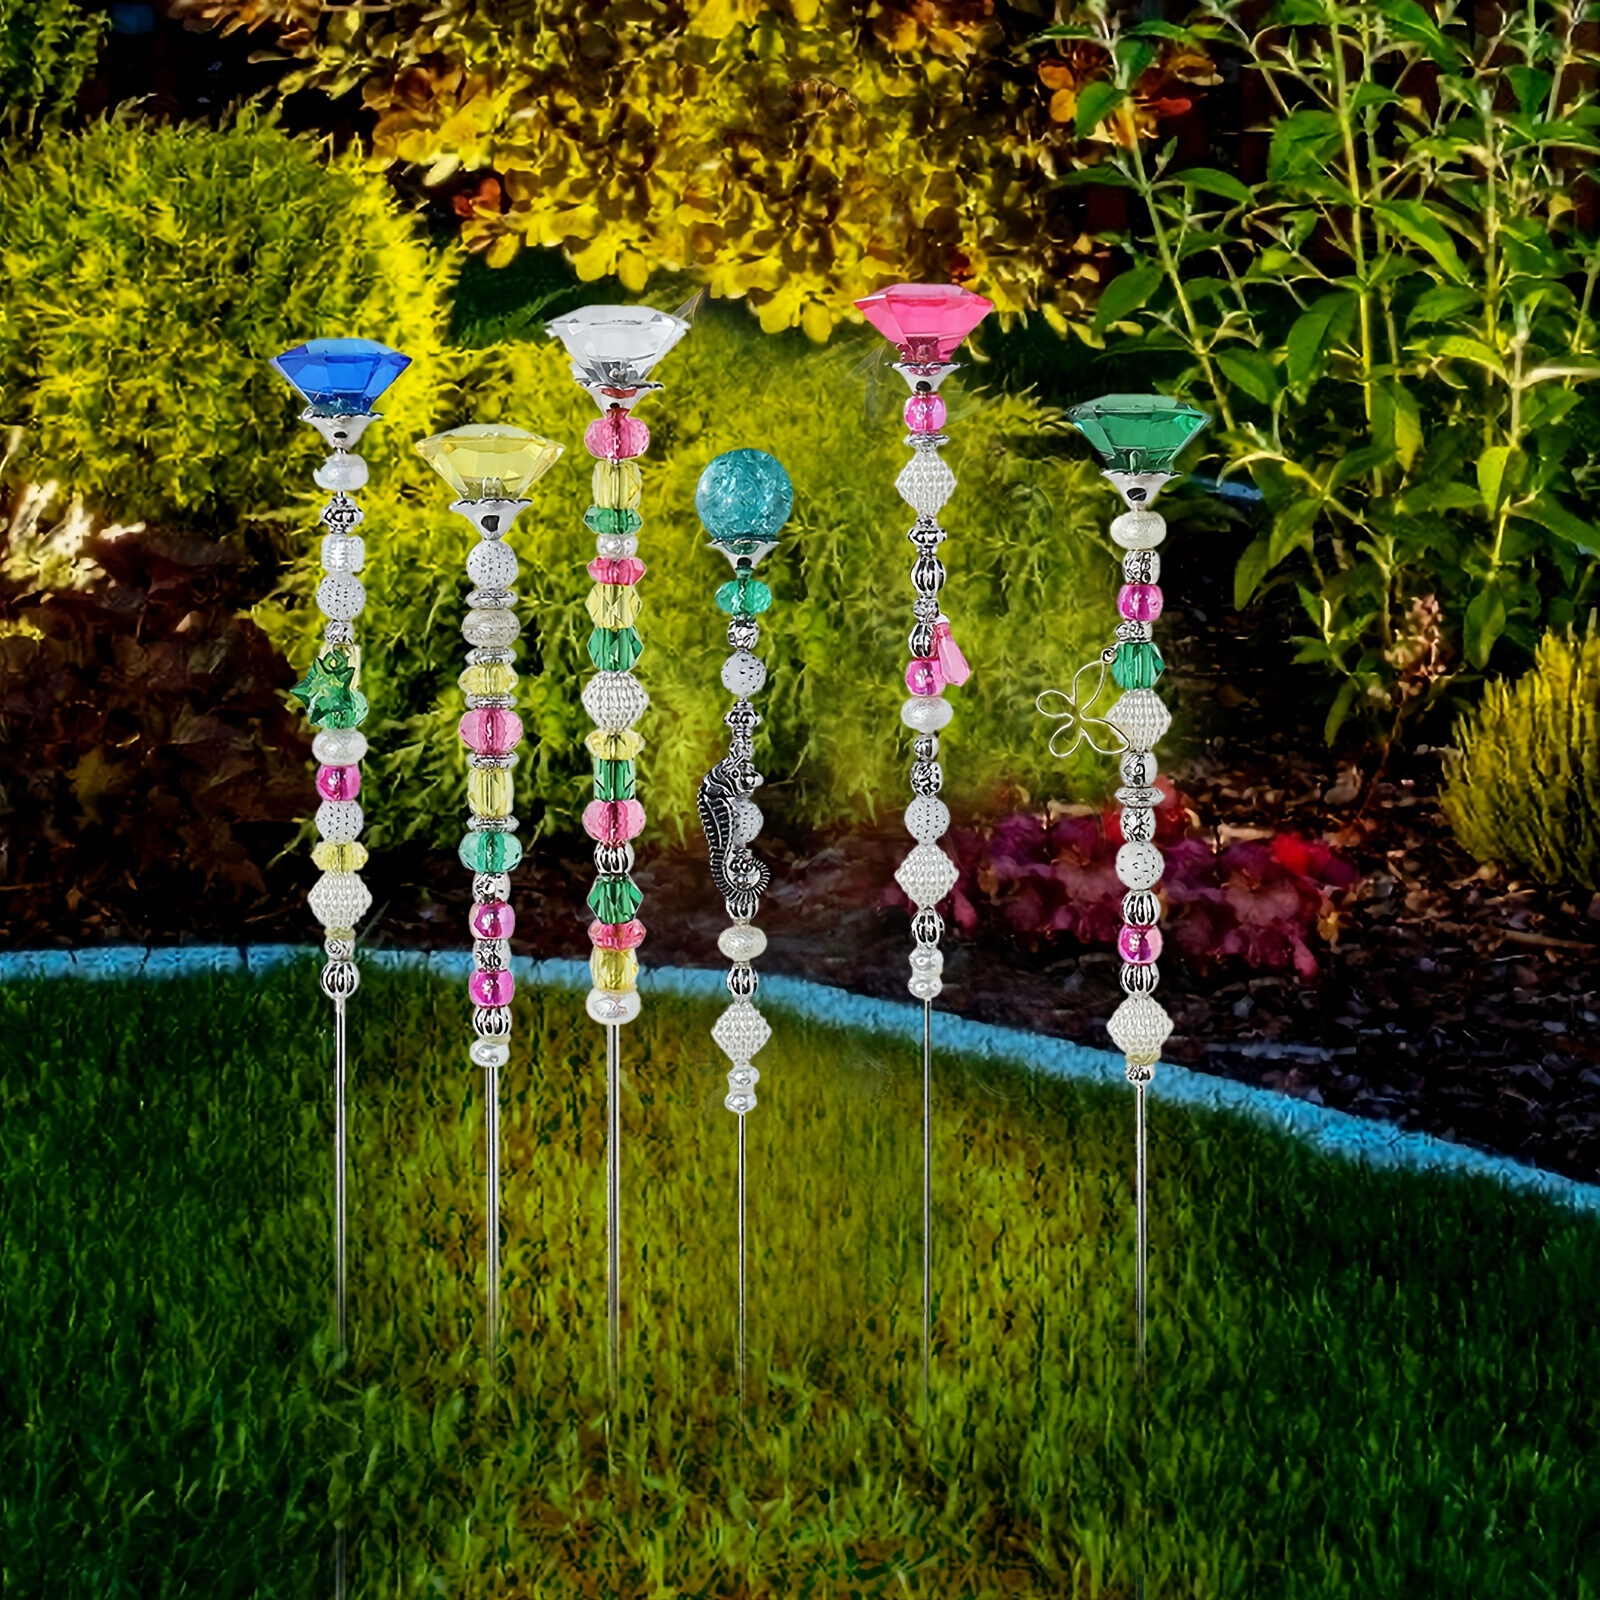 

1pc Colorful Handmade Beaded Stakes Garden Decor Outdoor Gifts For Flower Pot Decor Patio Lawn & Garden Metal Yard Decor, 11.81 Inches